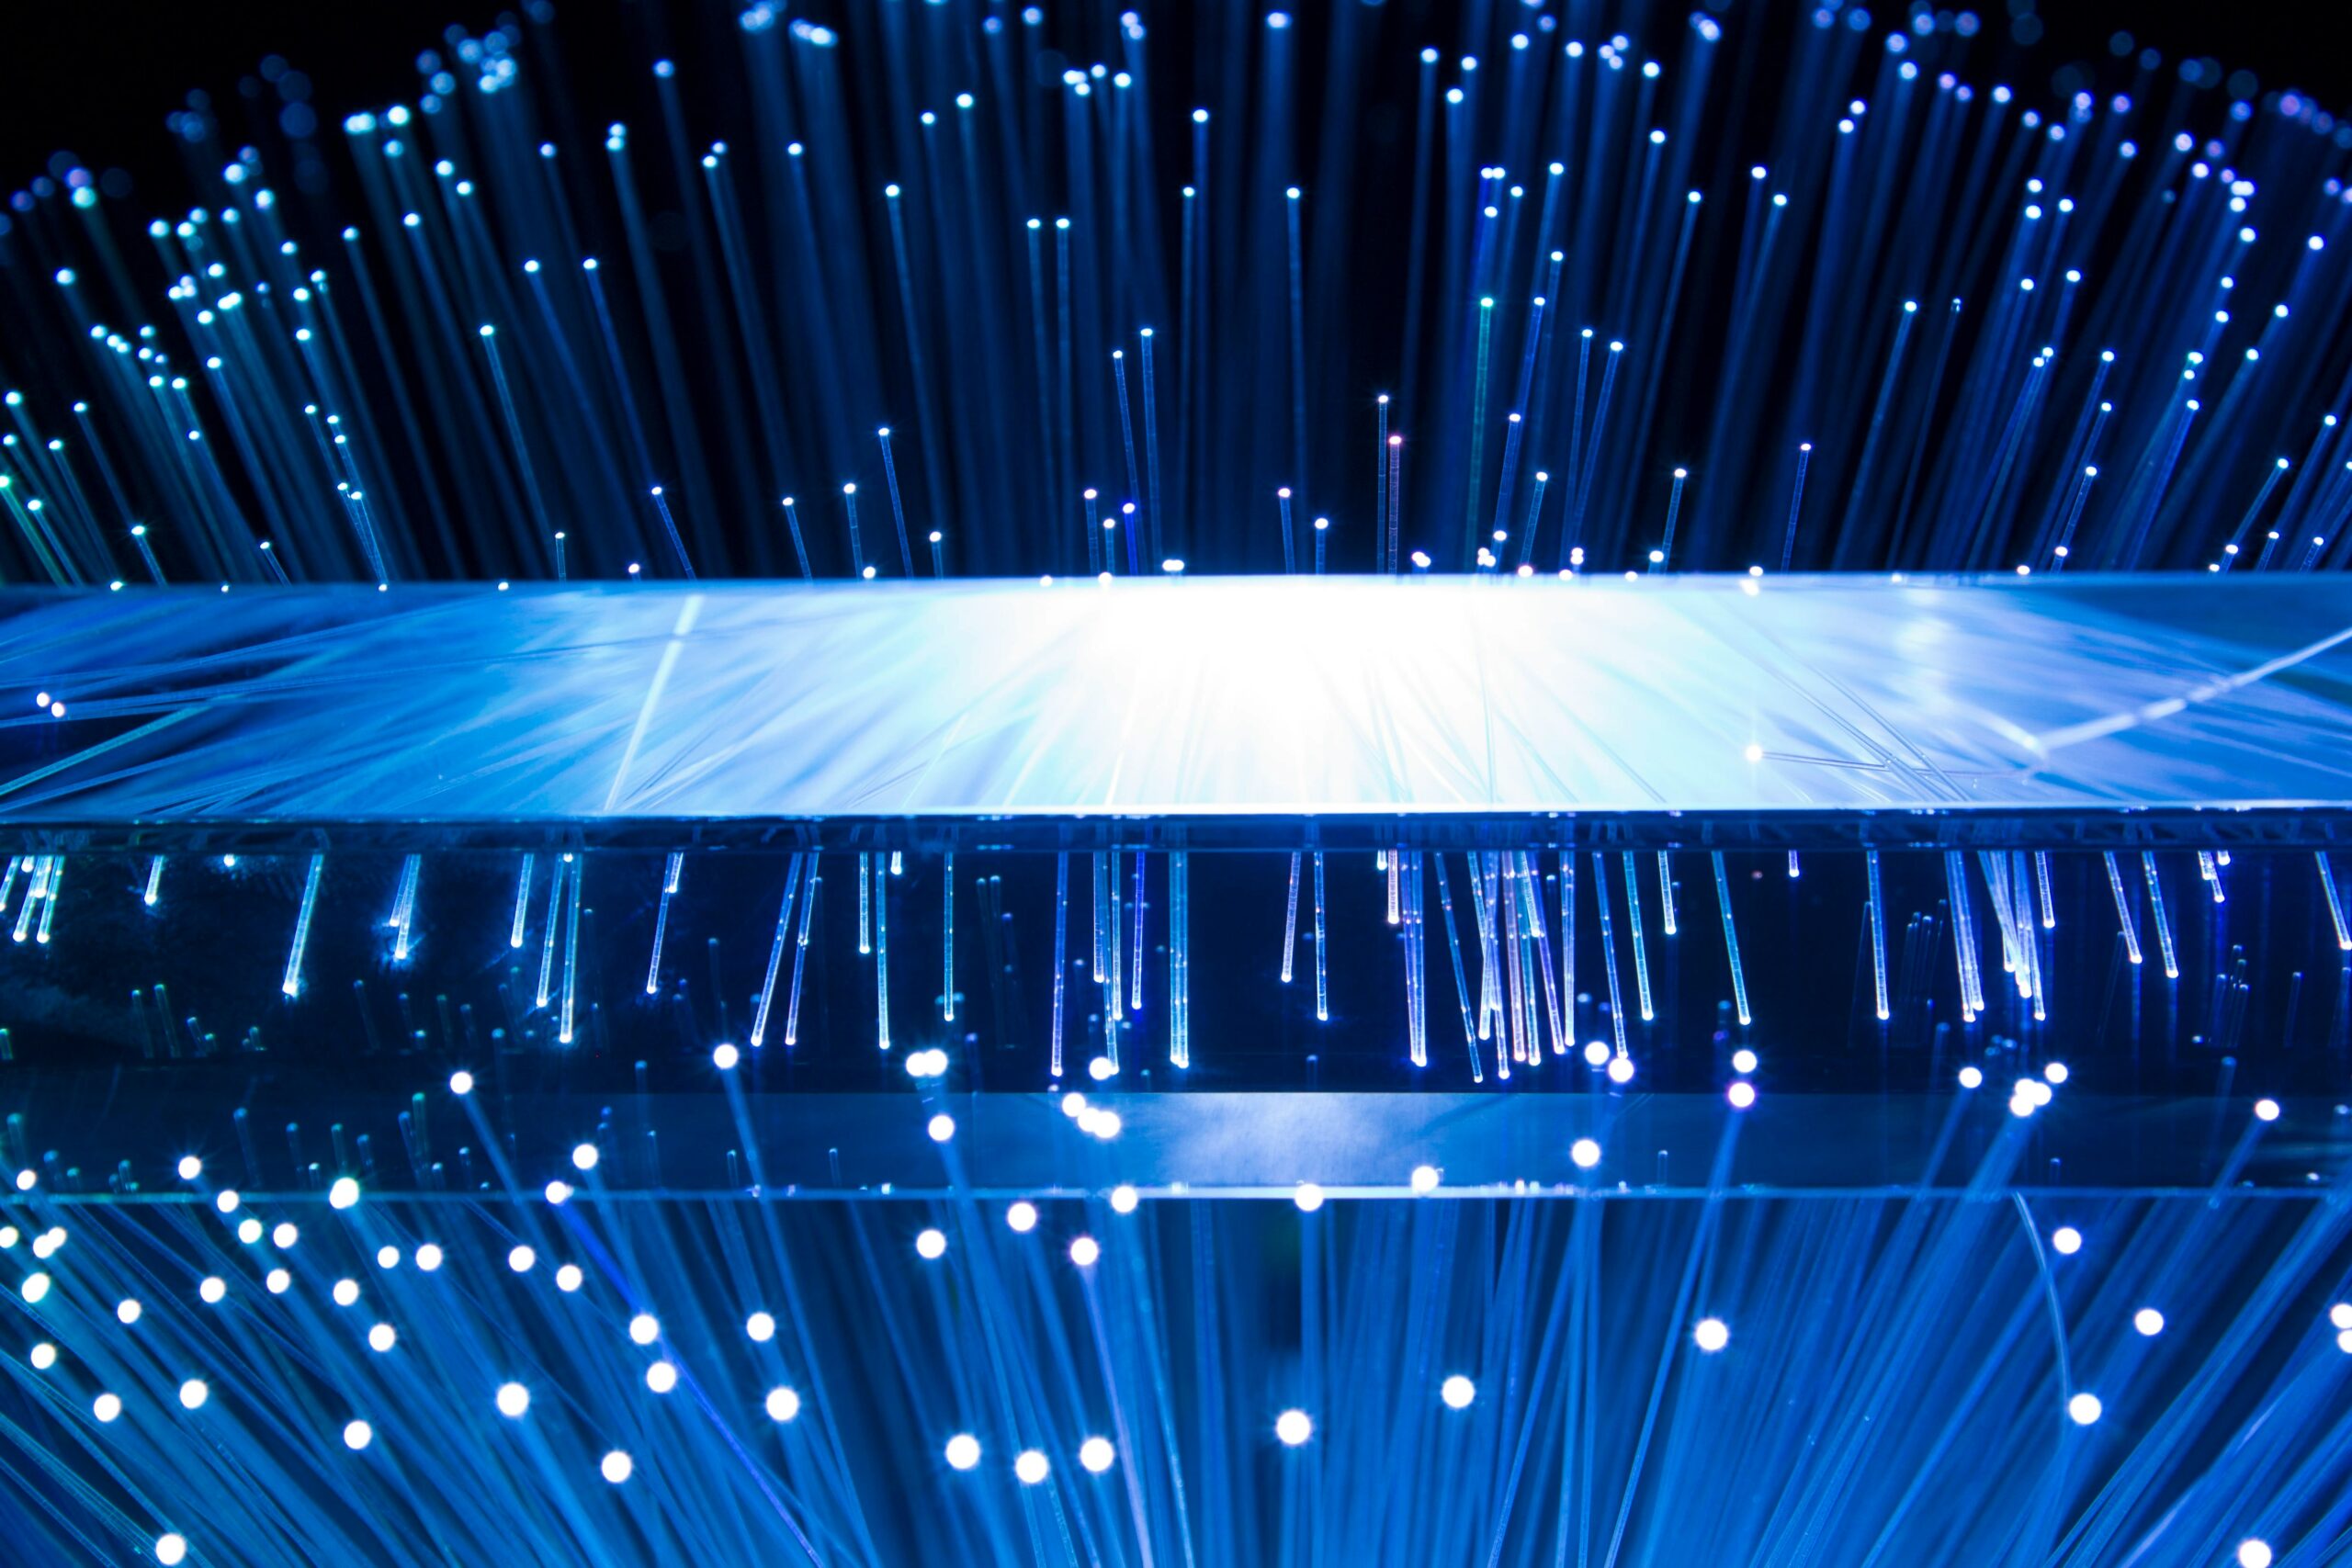 Abstract image of blue fibre lights creeping over the edge of a thin surface | test automation Opkey